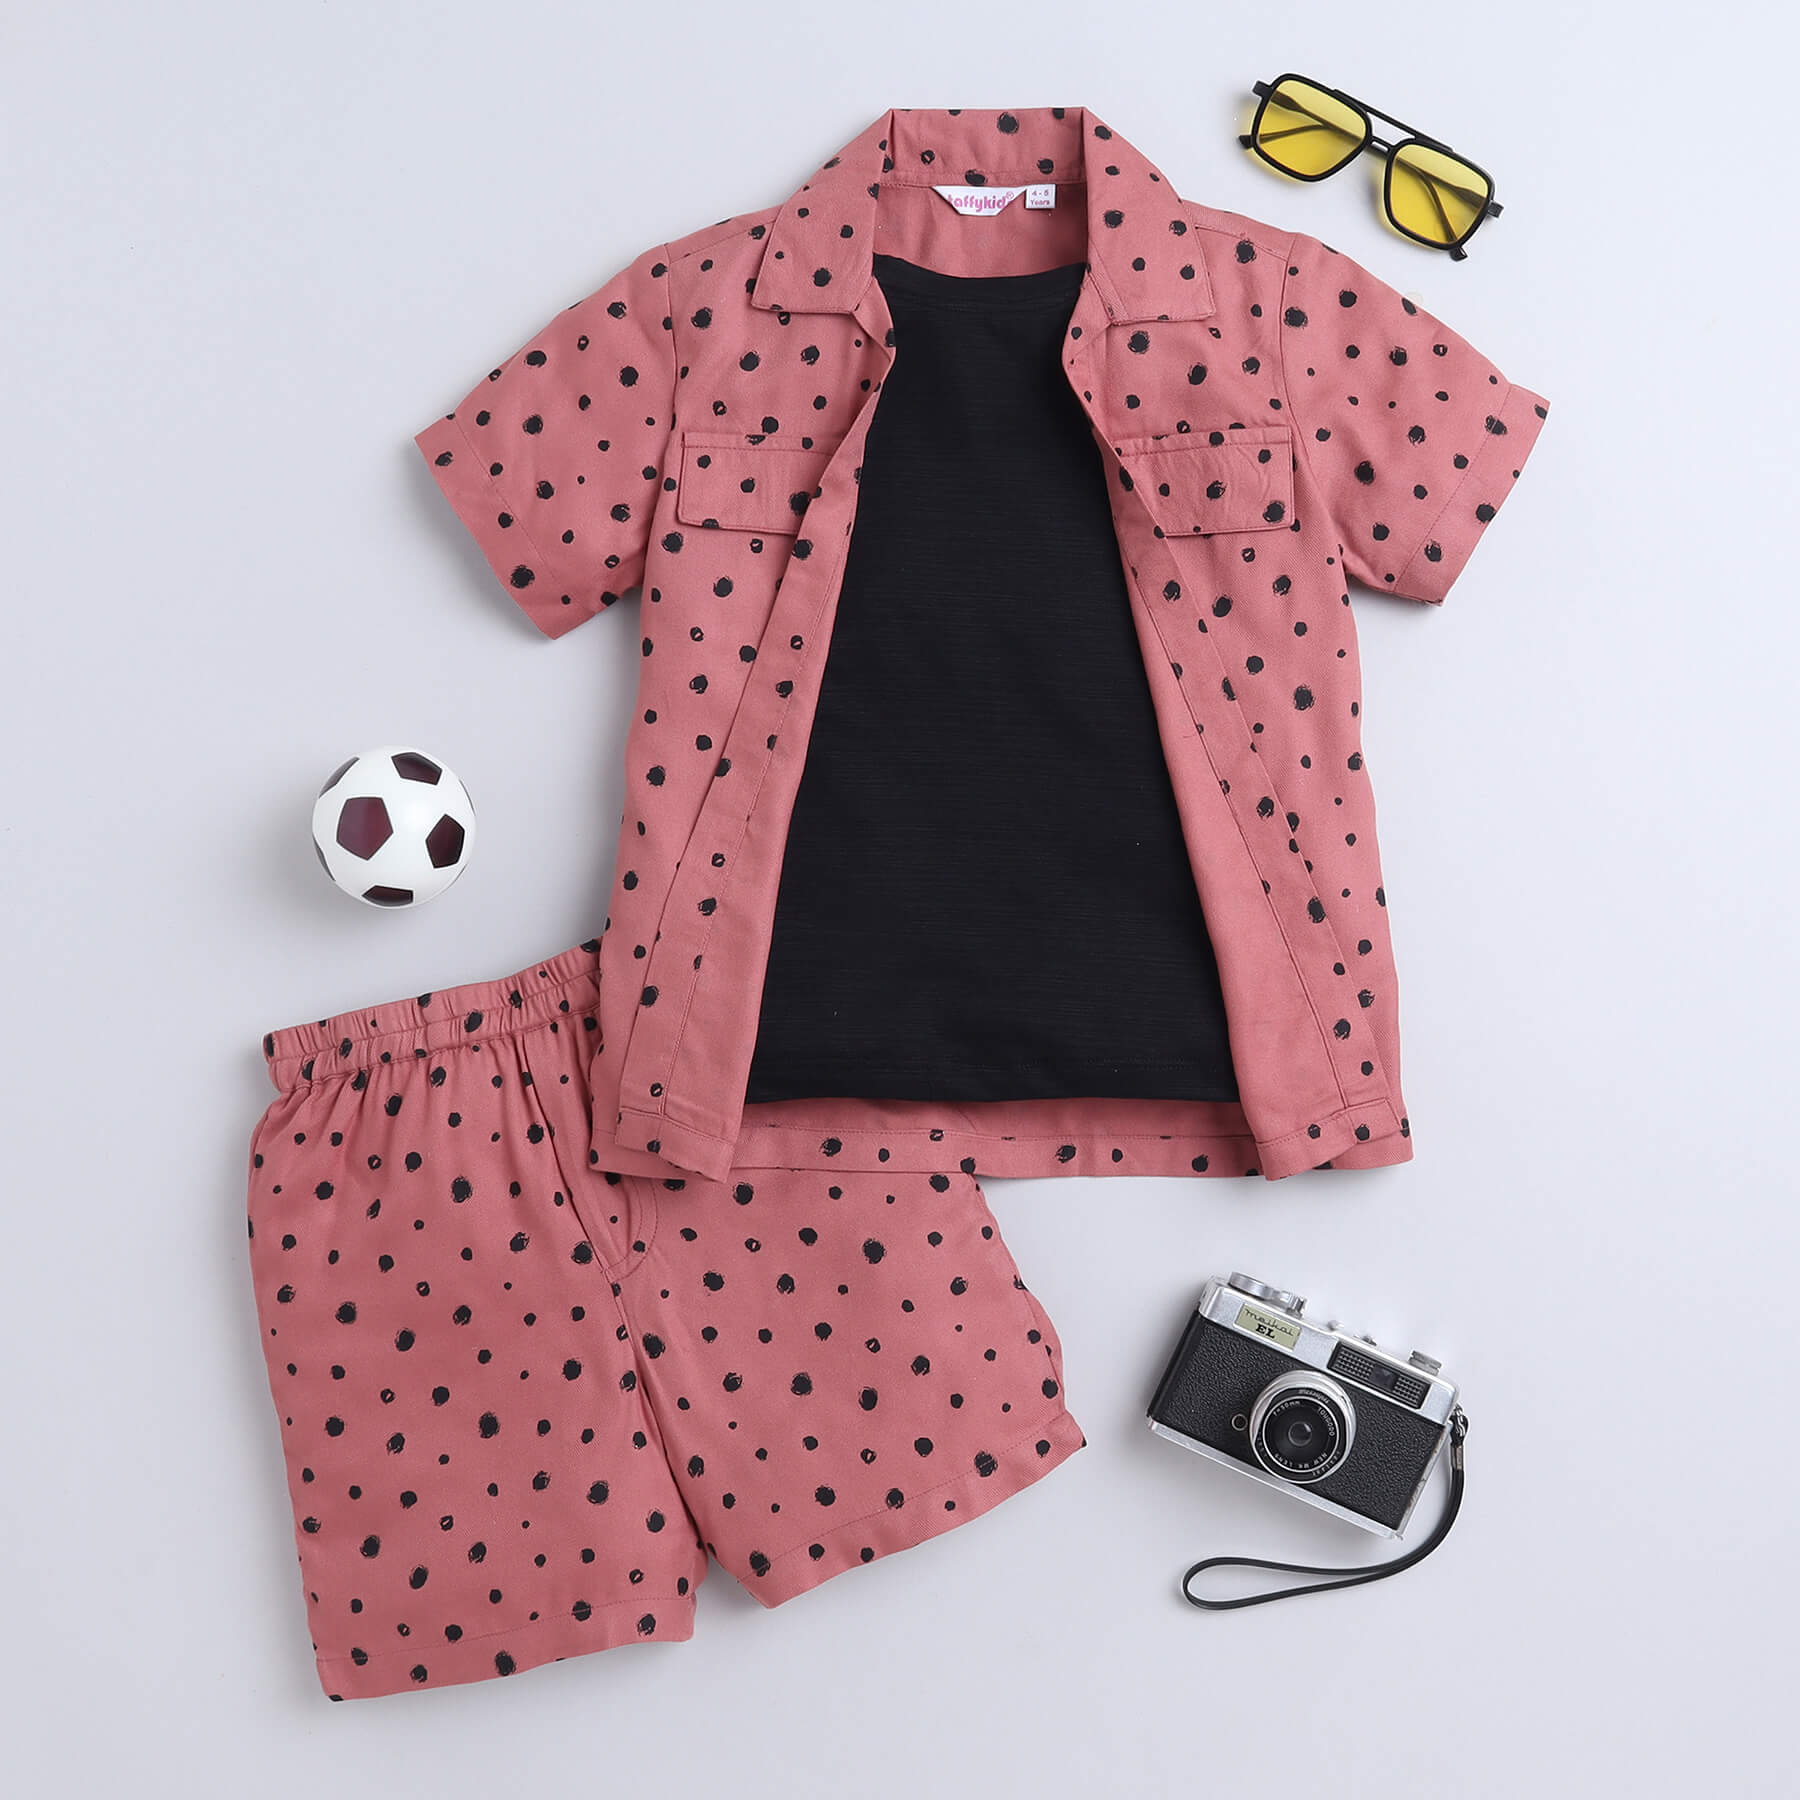 Taffykids Polka dots printed half sleeves shirt with attach tee and matching short set-Brown/Black